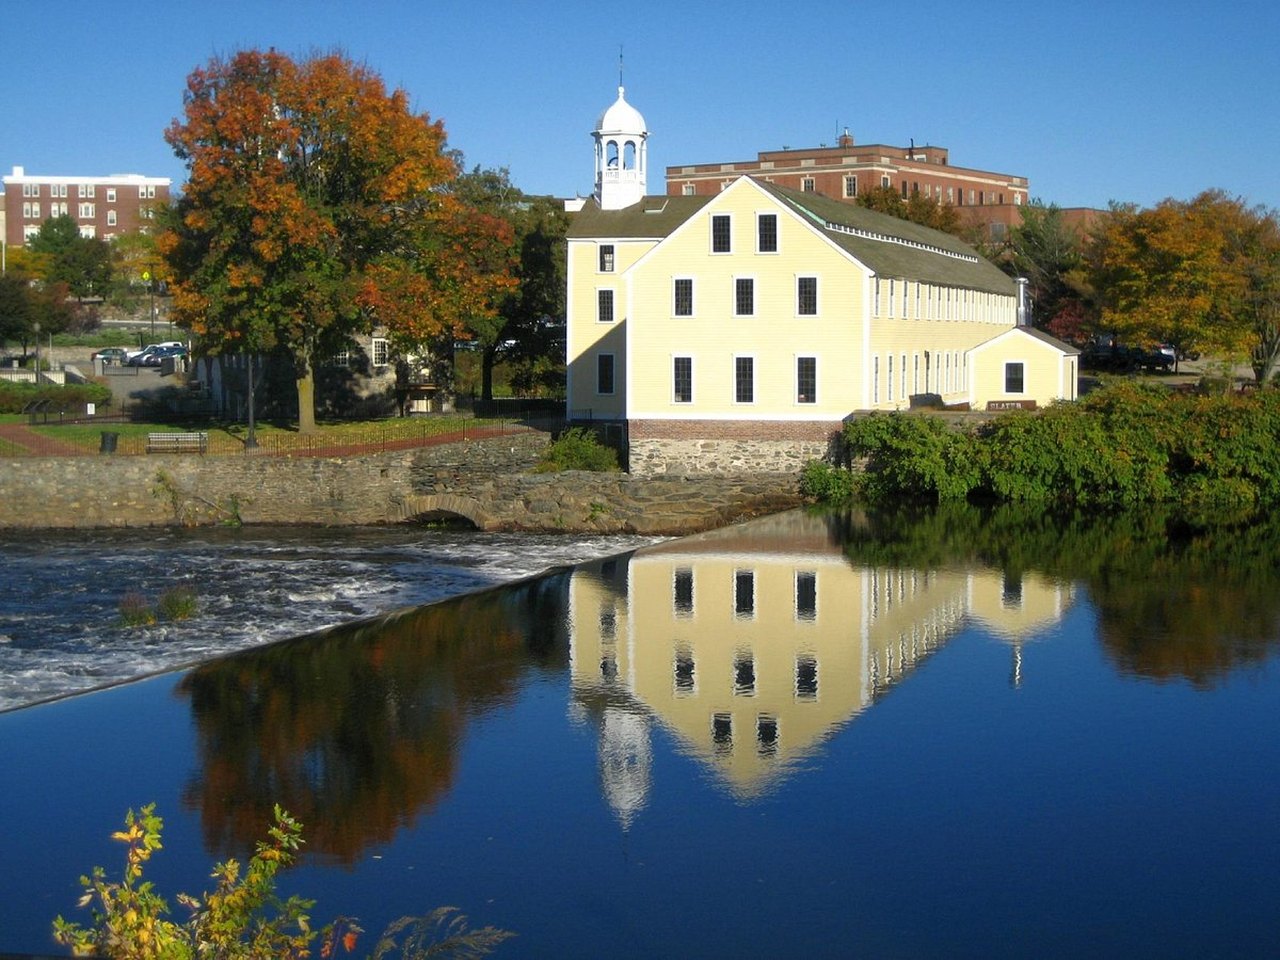 11-facts-about-local-legends-and-folklore-in-pawtucket-rhode-island